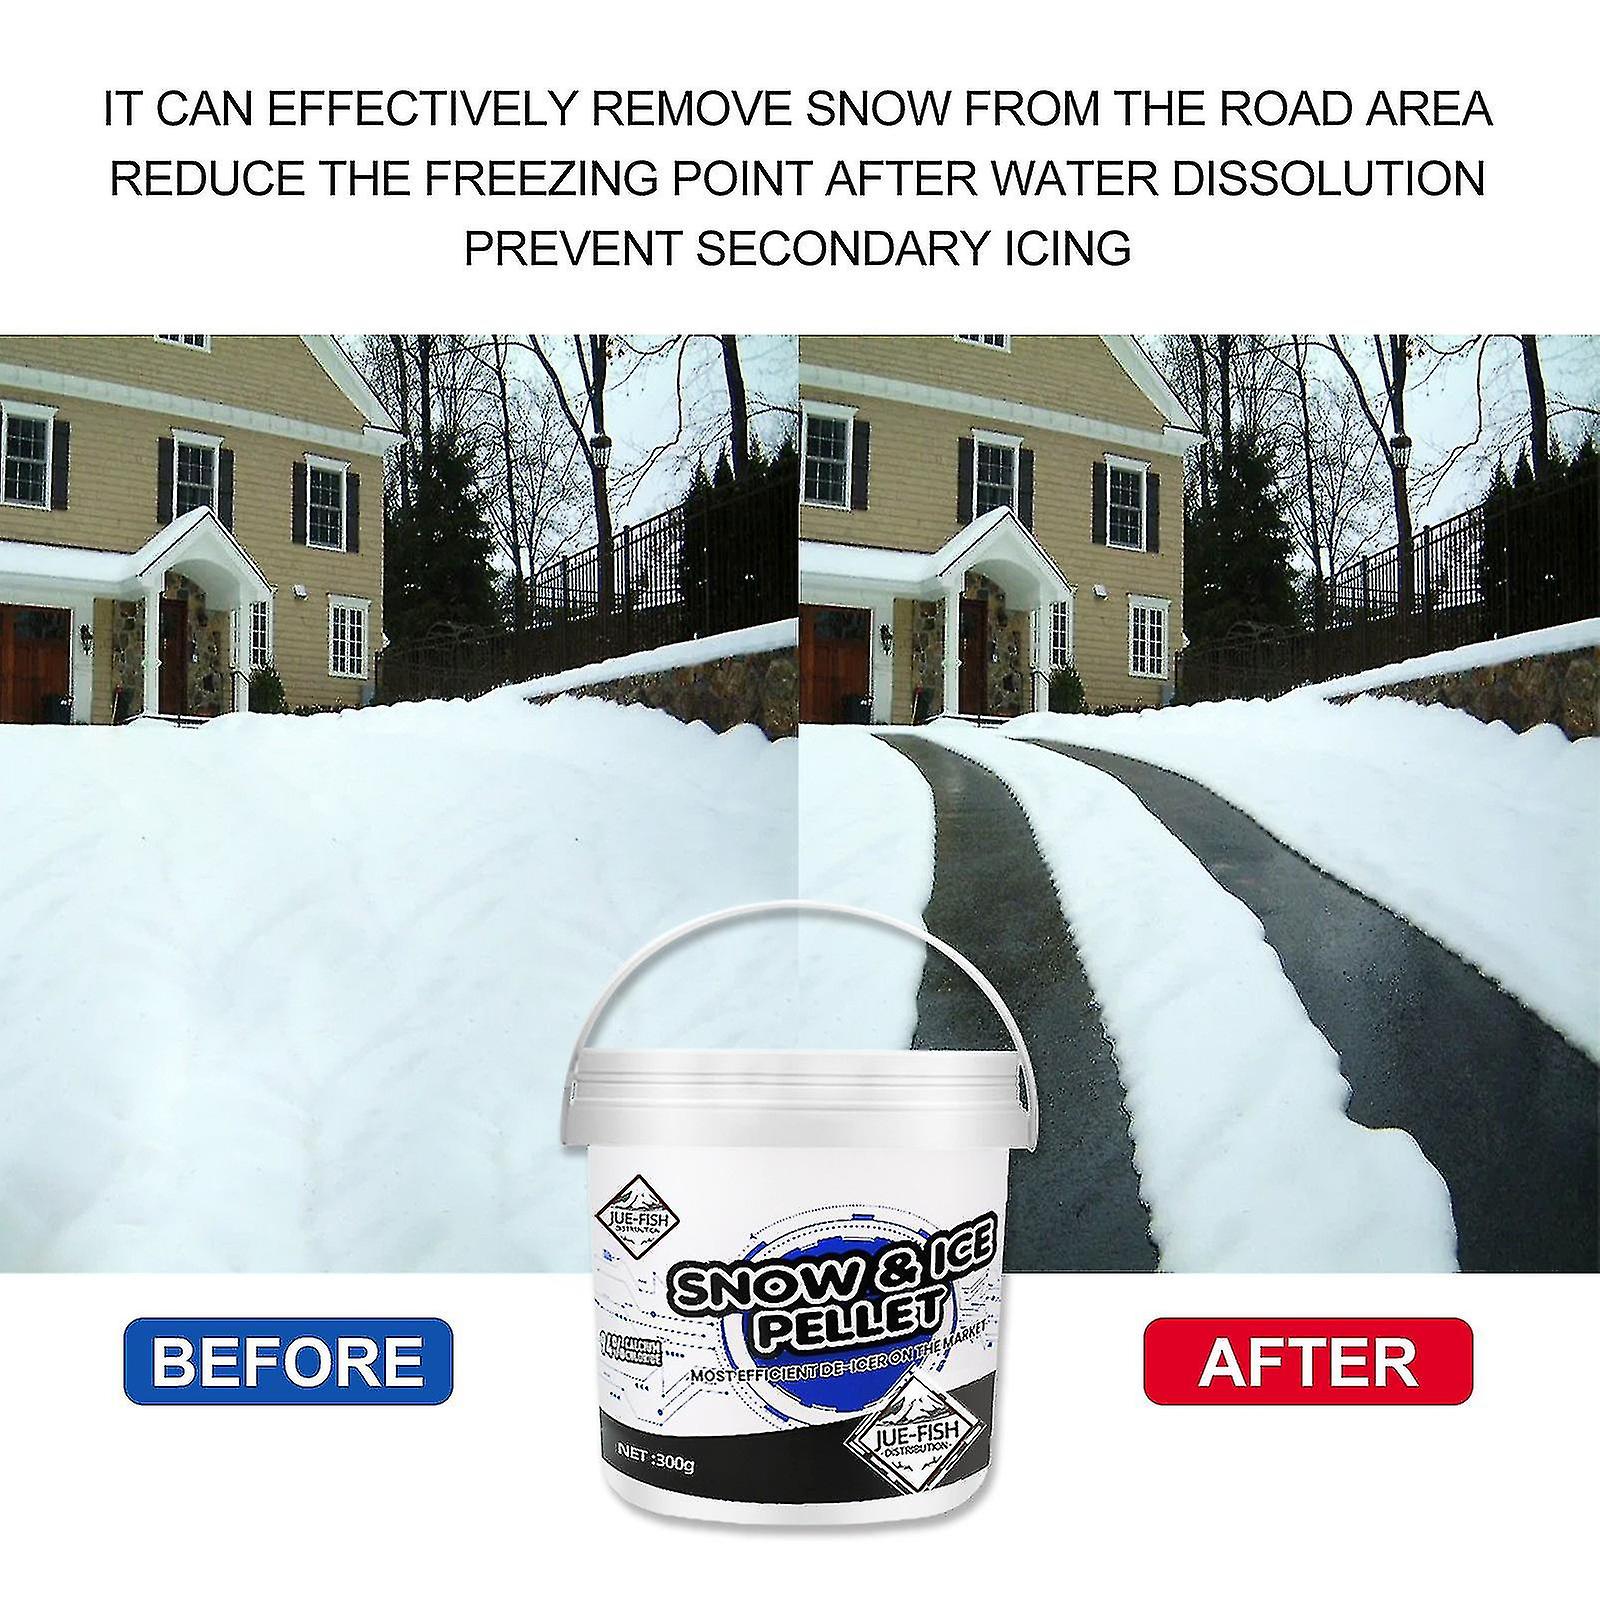 Snow Remover For Effectively Removing Snow From Vehicles And Roads